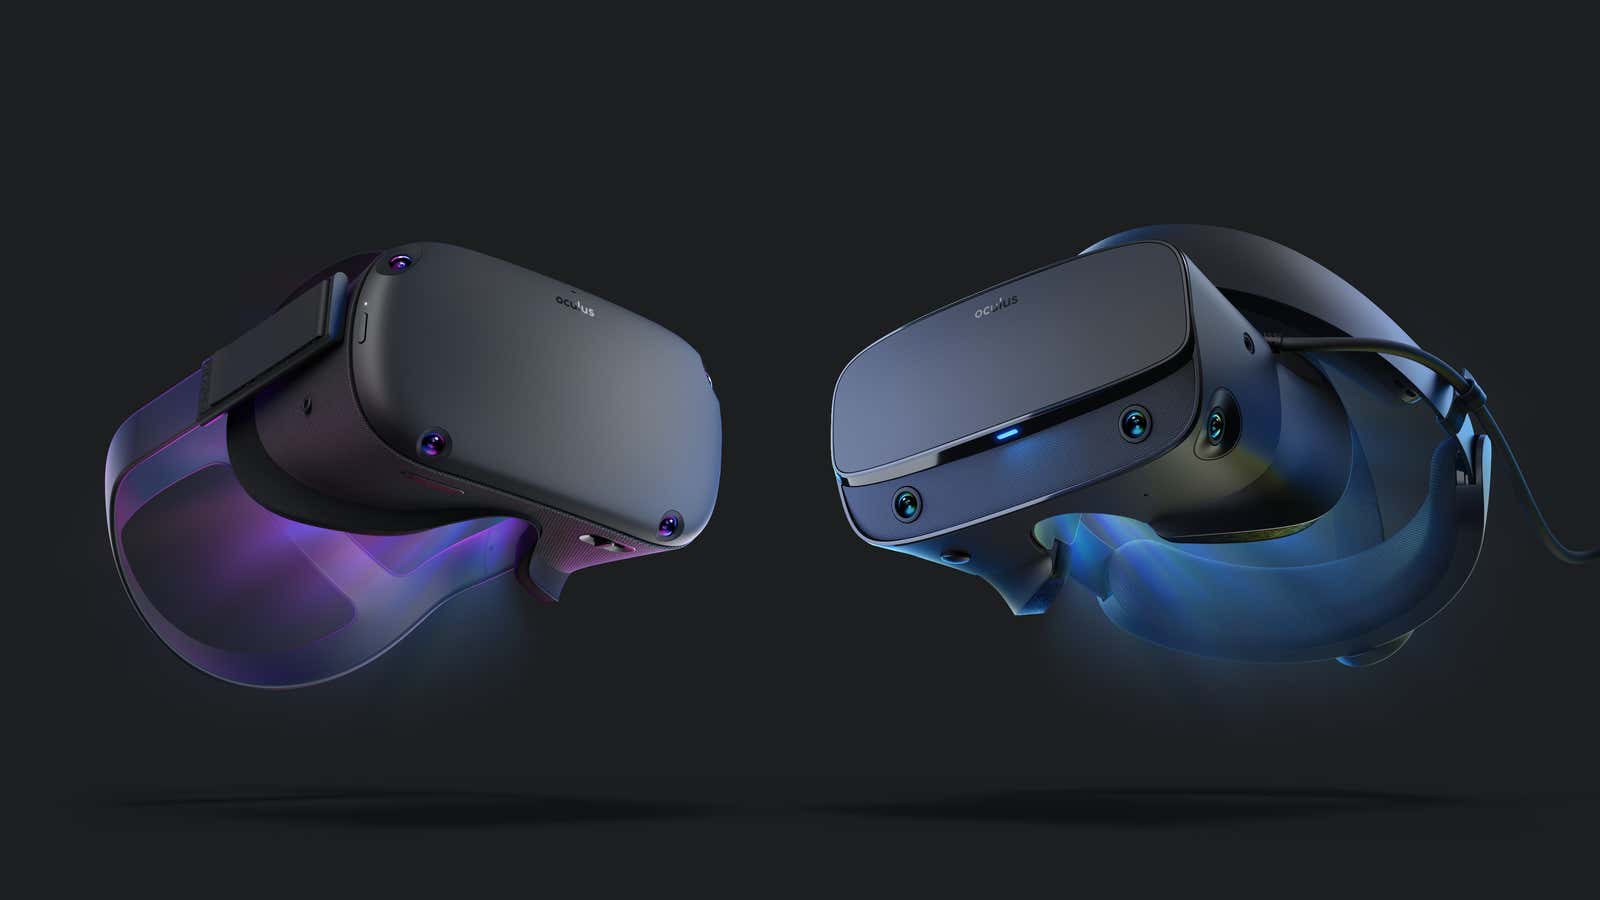 The Oculus Quest and Rift S.